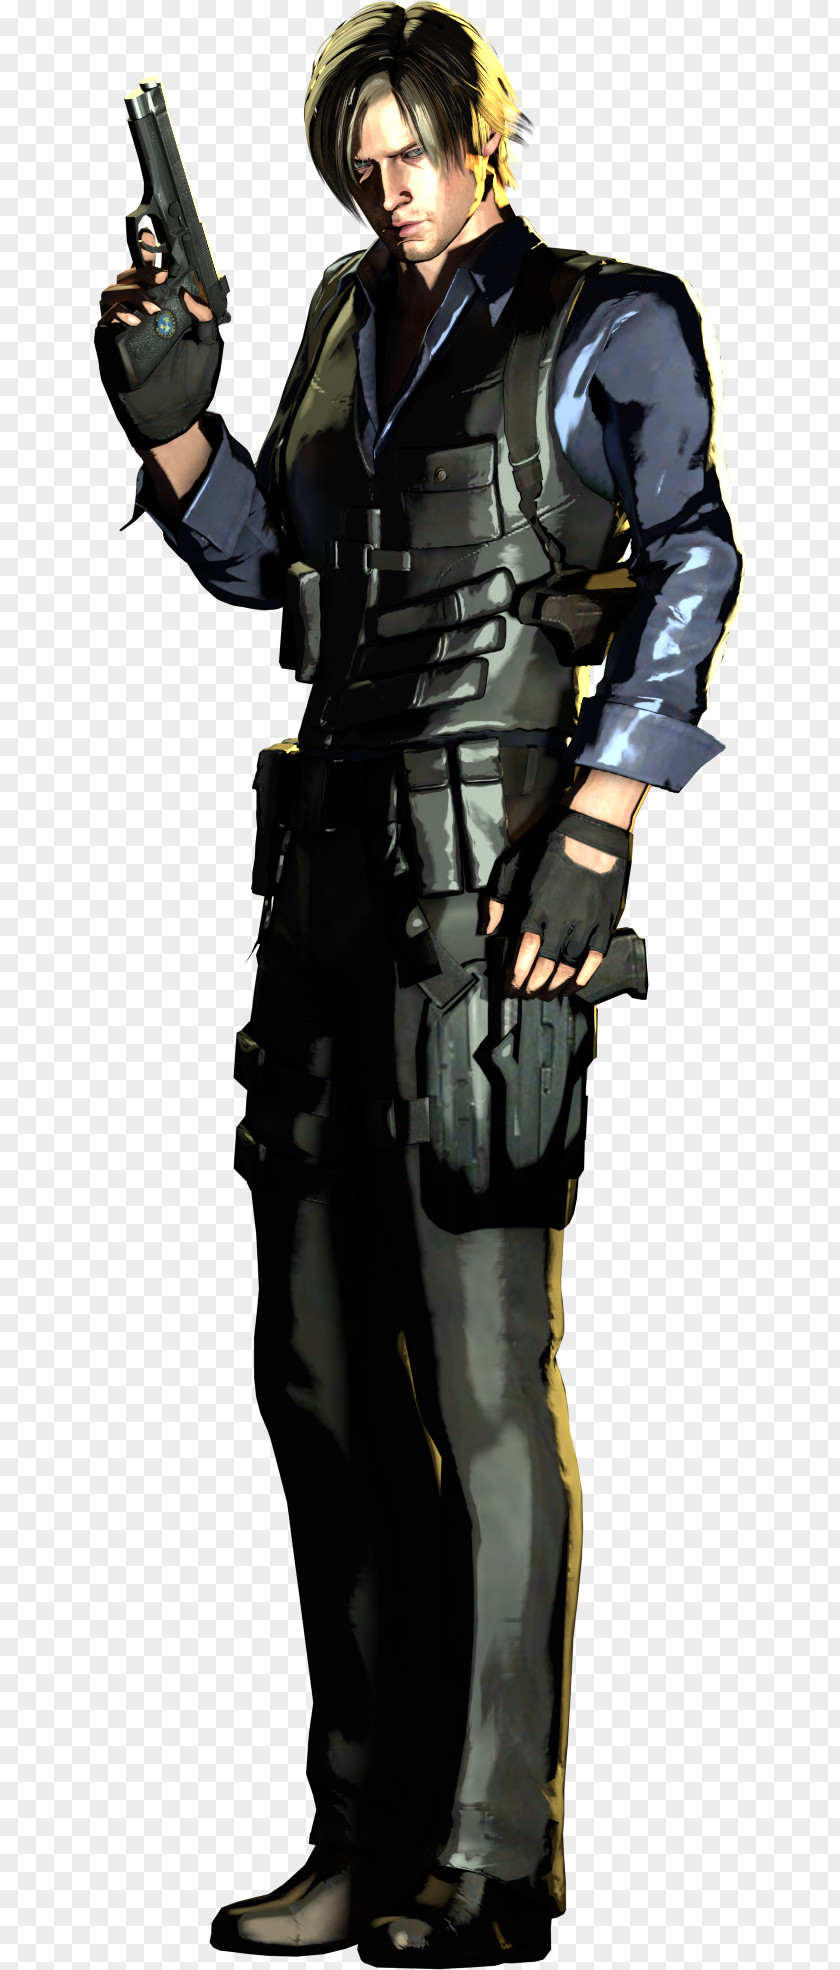 Resident Evil 6 Leon S. Kennedy Ada Wong 2 Chris Redfield PNG